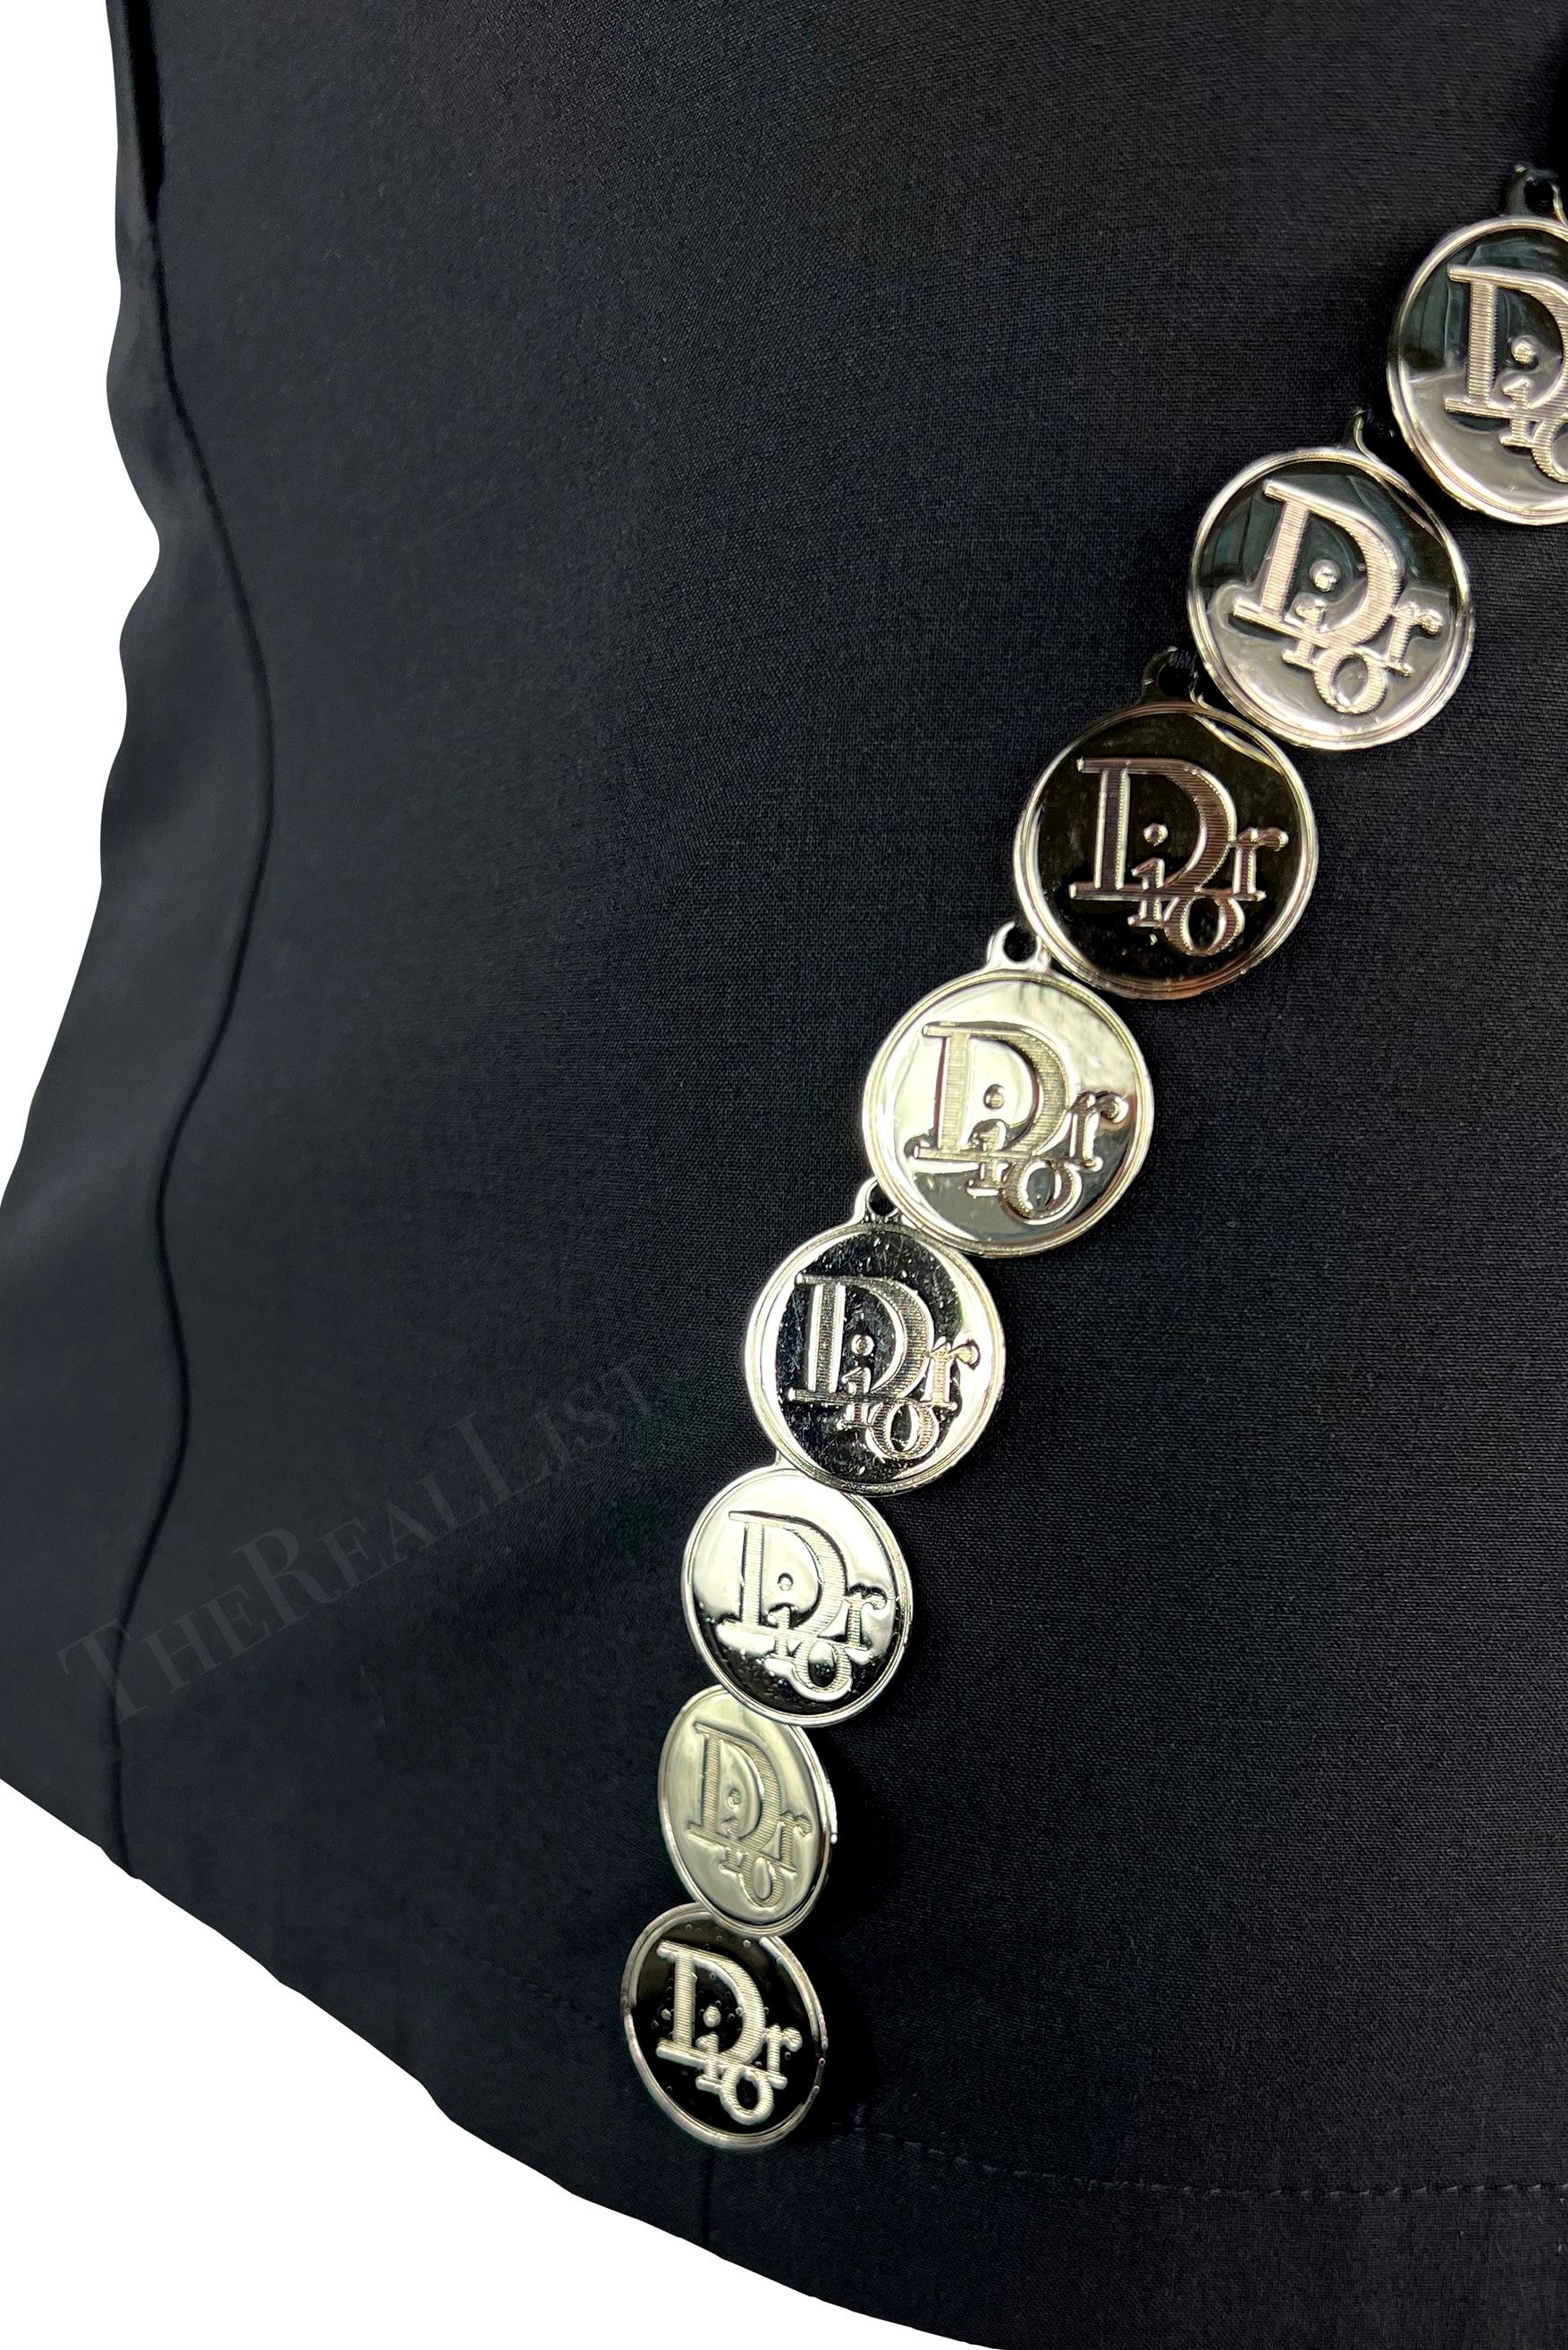 Presenting a fabulous black Christian Dior mini skirt, designed by John Galliano. From the Spring/Summer 2004 collection, this chic black skirt is elevated with silver-tone 'Dior' logo medallions that run down either side.

Size - 38FR/6US
Waistband